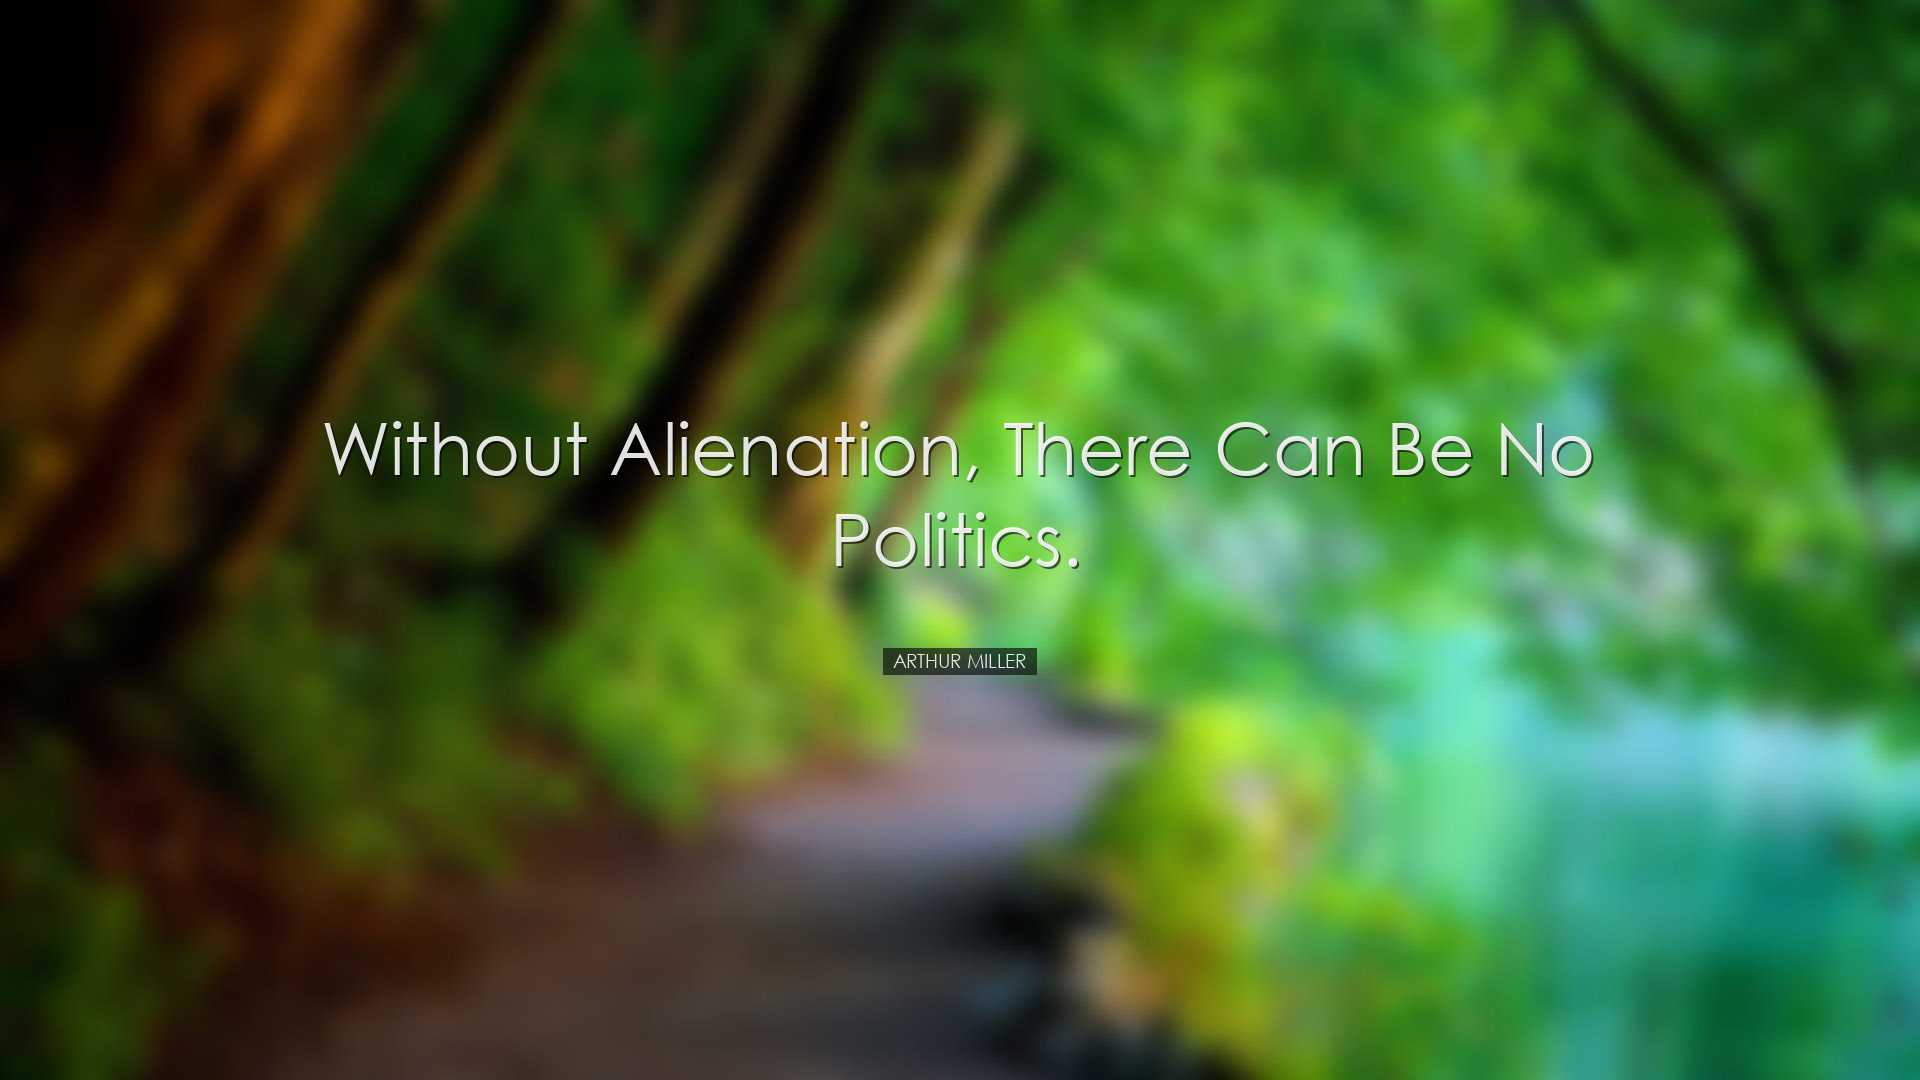 Without alienation, there can be no politics. - Arthur Miller